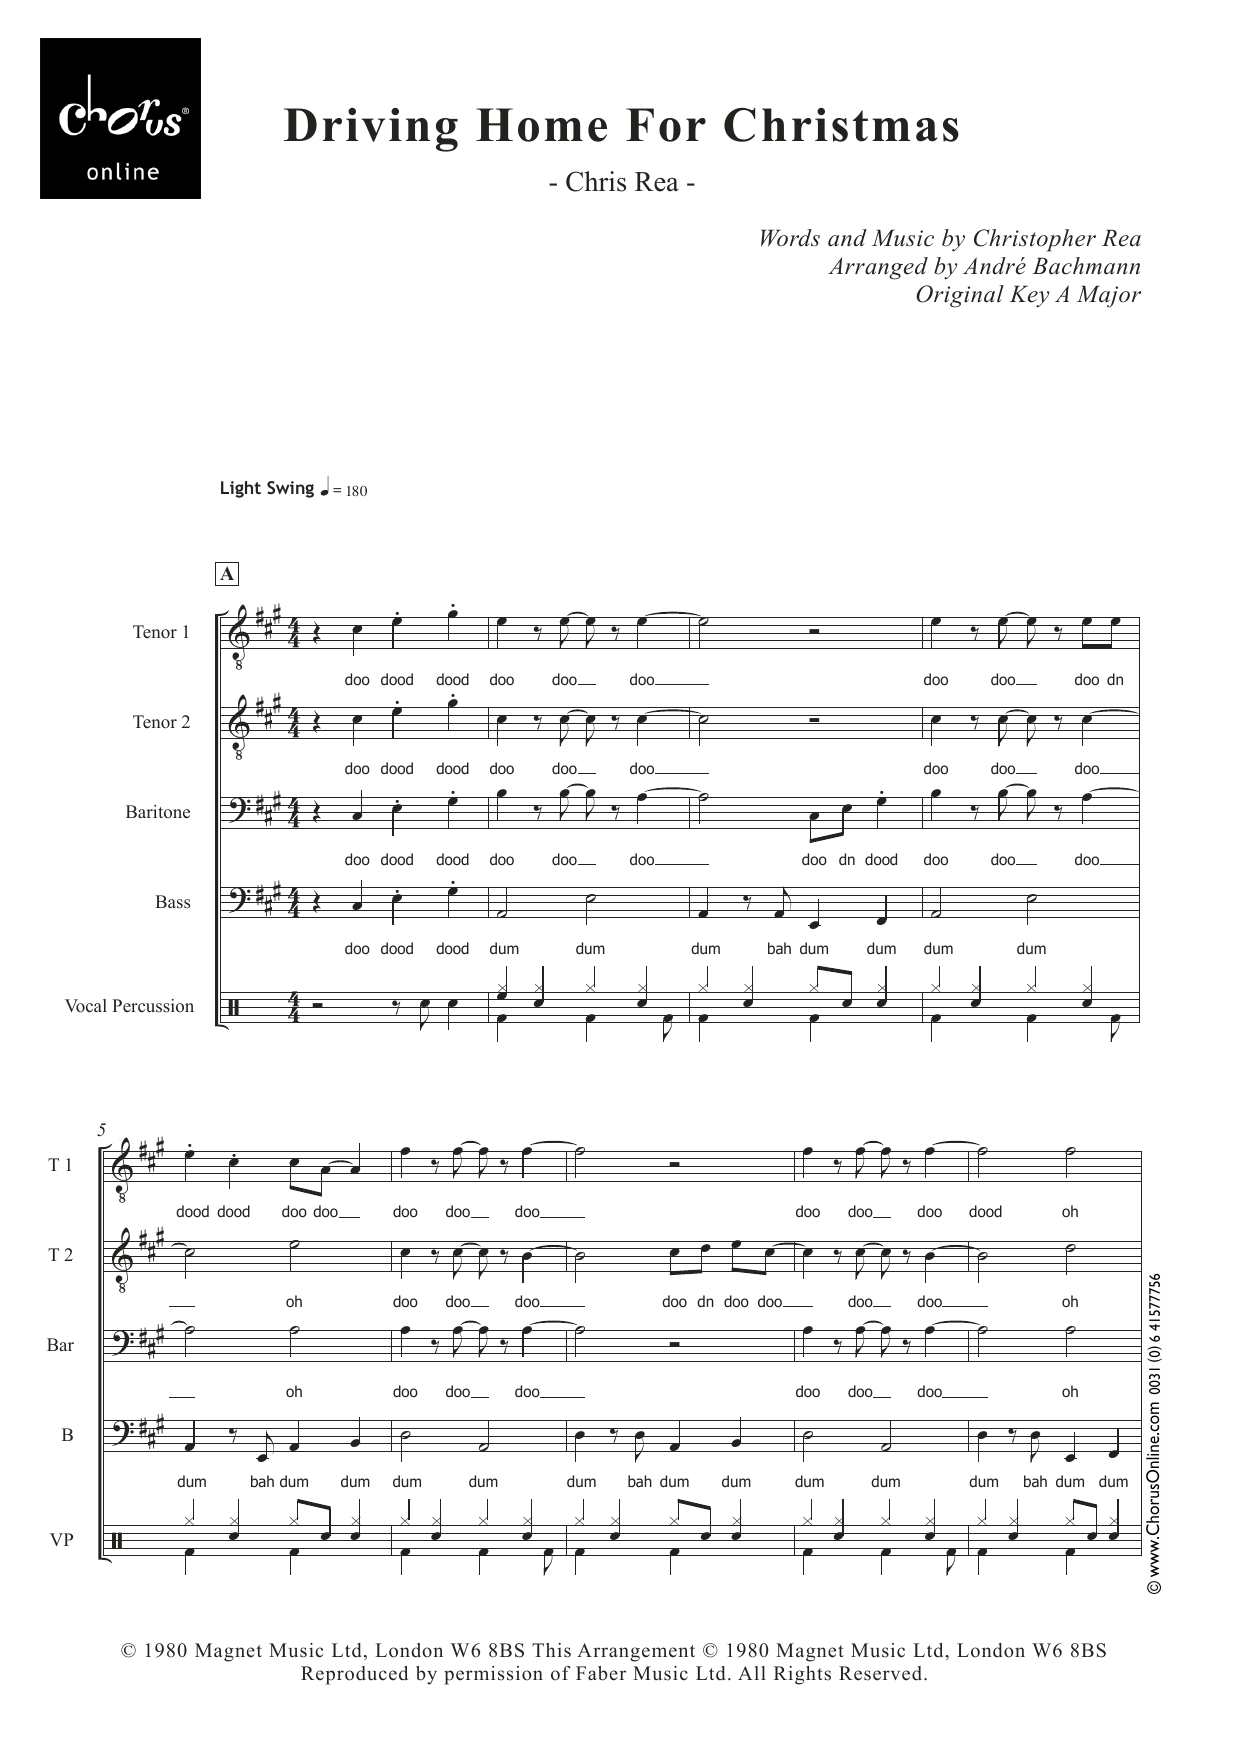 Chris Rea Driving Home From Christmas (arr. André Bachman) sheet music notes printable PDF score